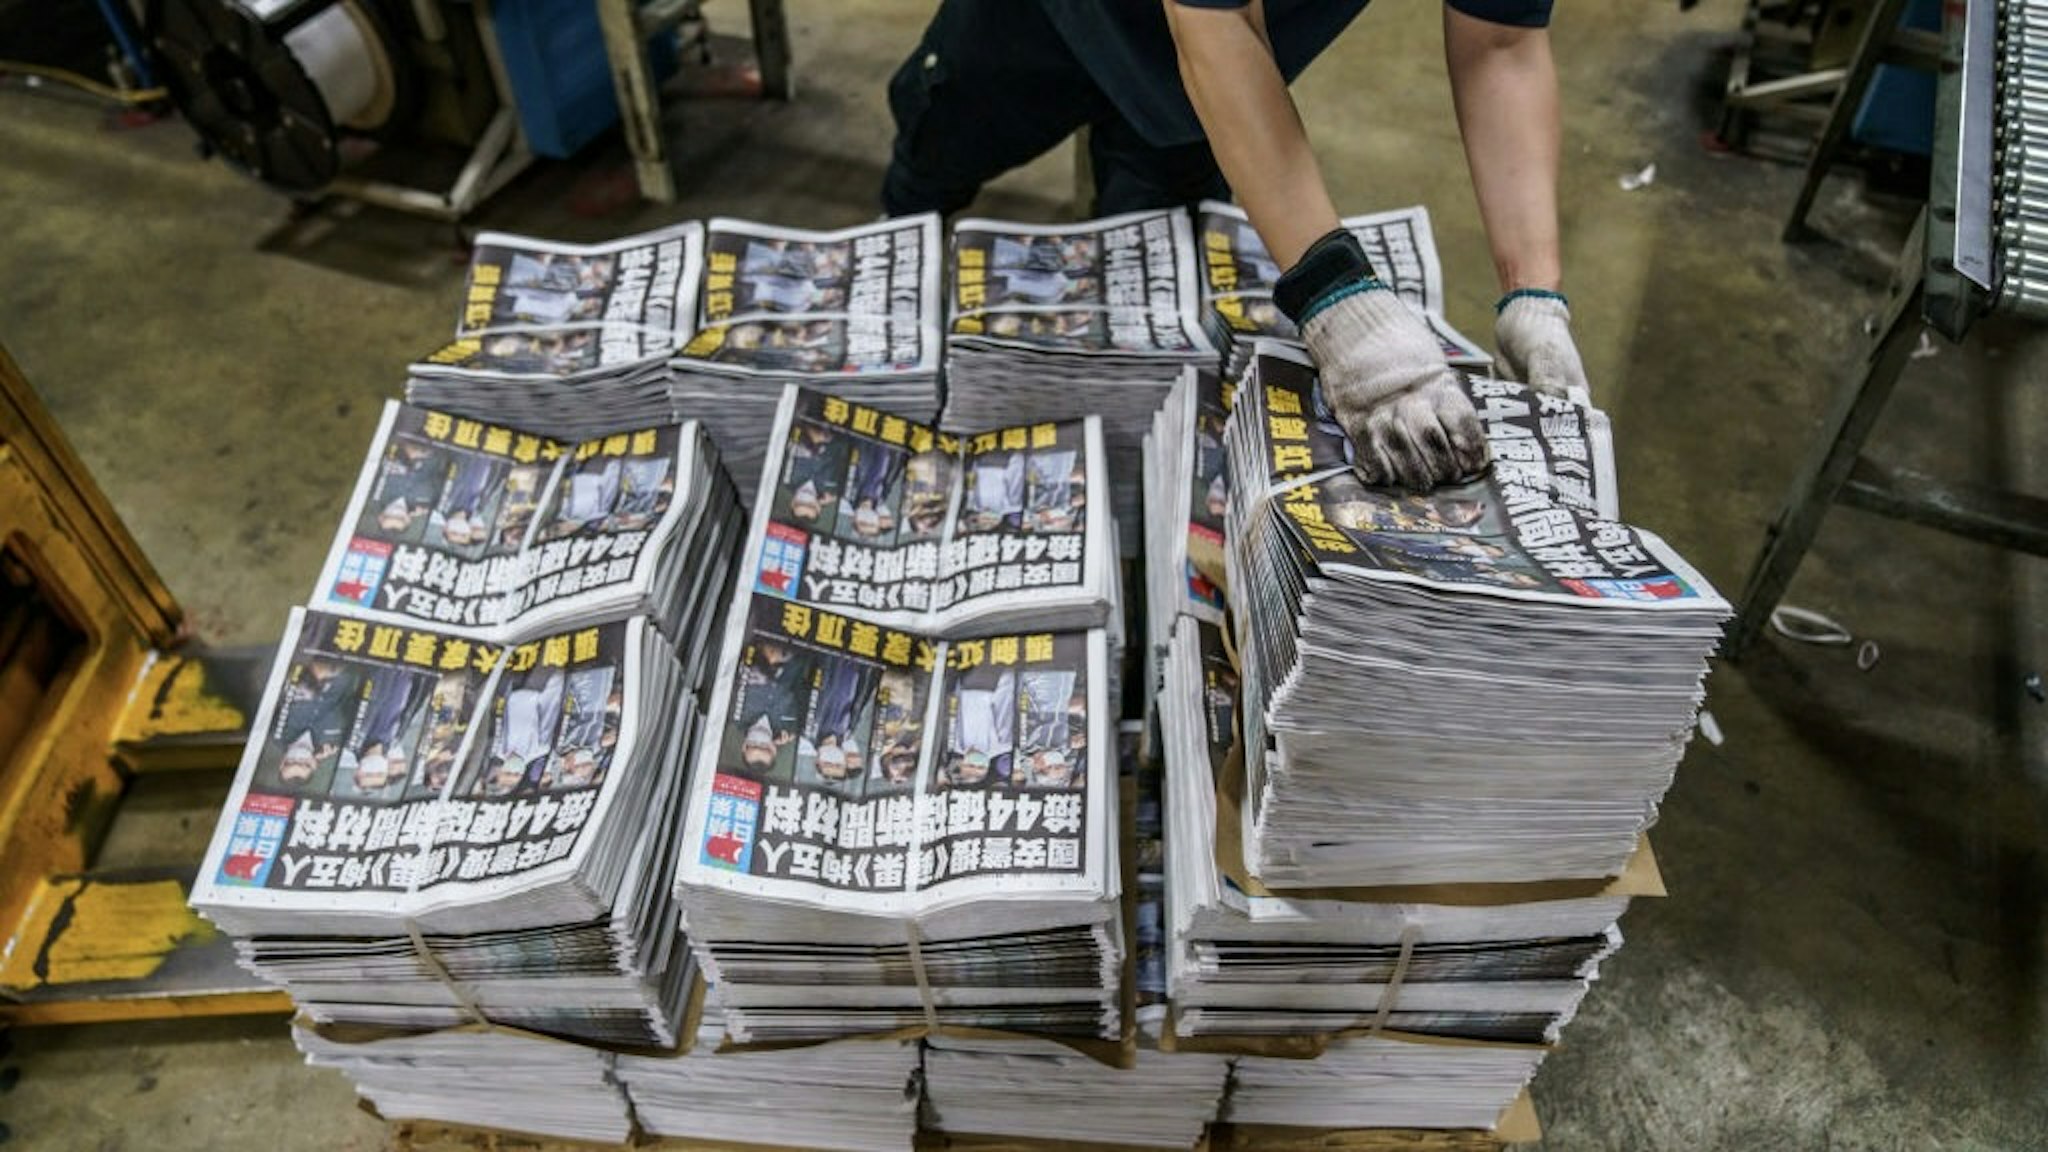 Printing of the Apple Daily Following Police Arrest of Top Editors Citing Security Law An employee arranges bundles of the Apple Daily newspaper, published by Next Digital Ltd., at the company's printing facility in Hong Kong, China, early on Friday, June 18, 2021. China took another step toward extinguishing any form of dissent in Hong Kong, hailing police in the city for arresting top editors of the pro-democracy Apple Daily and warning journalists not to write articles that challenge Beijing. Photographer: Lam Yik/Bloomberg via Getty Images Bloomberg / Contributor via Getty Images